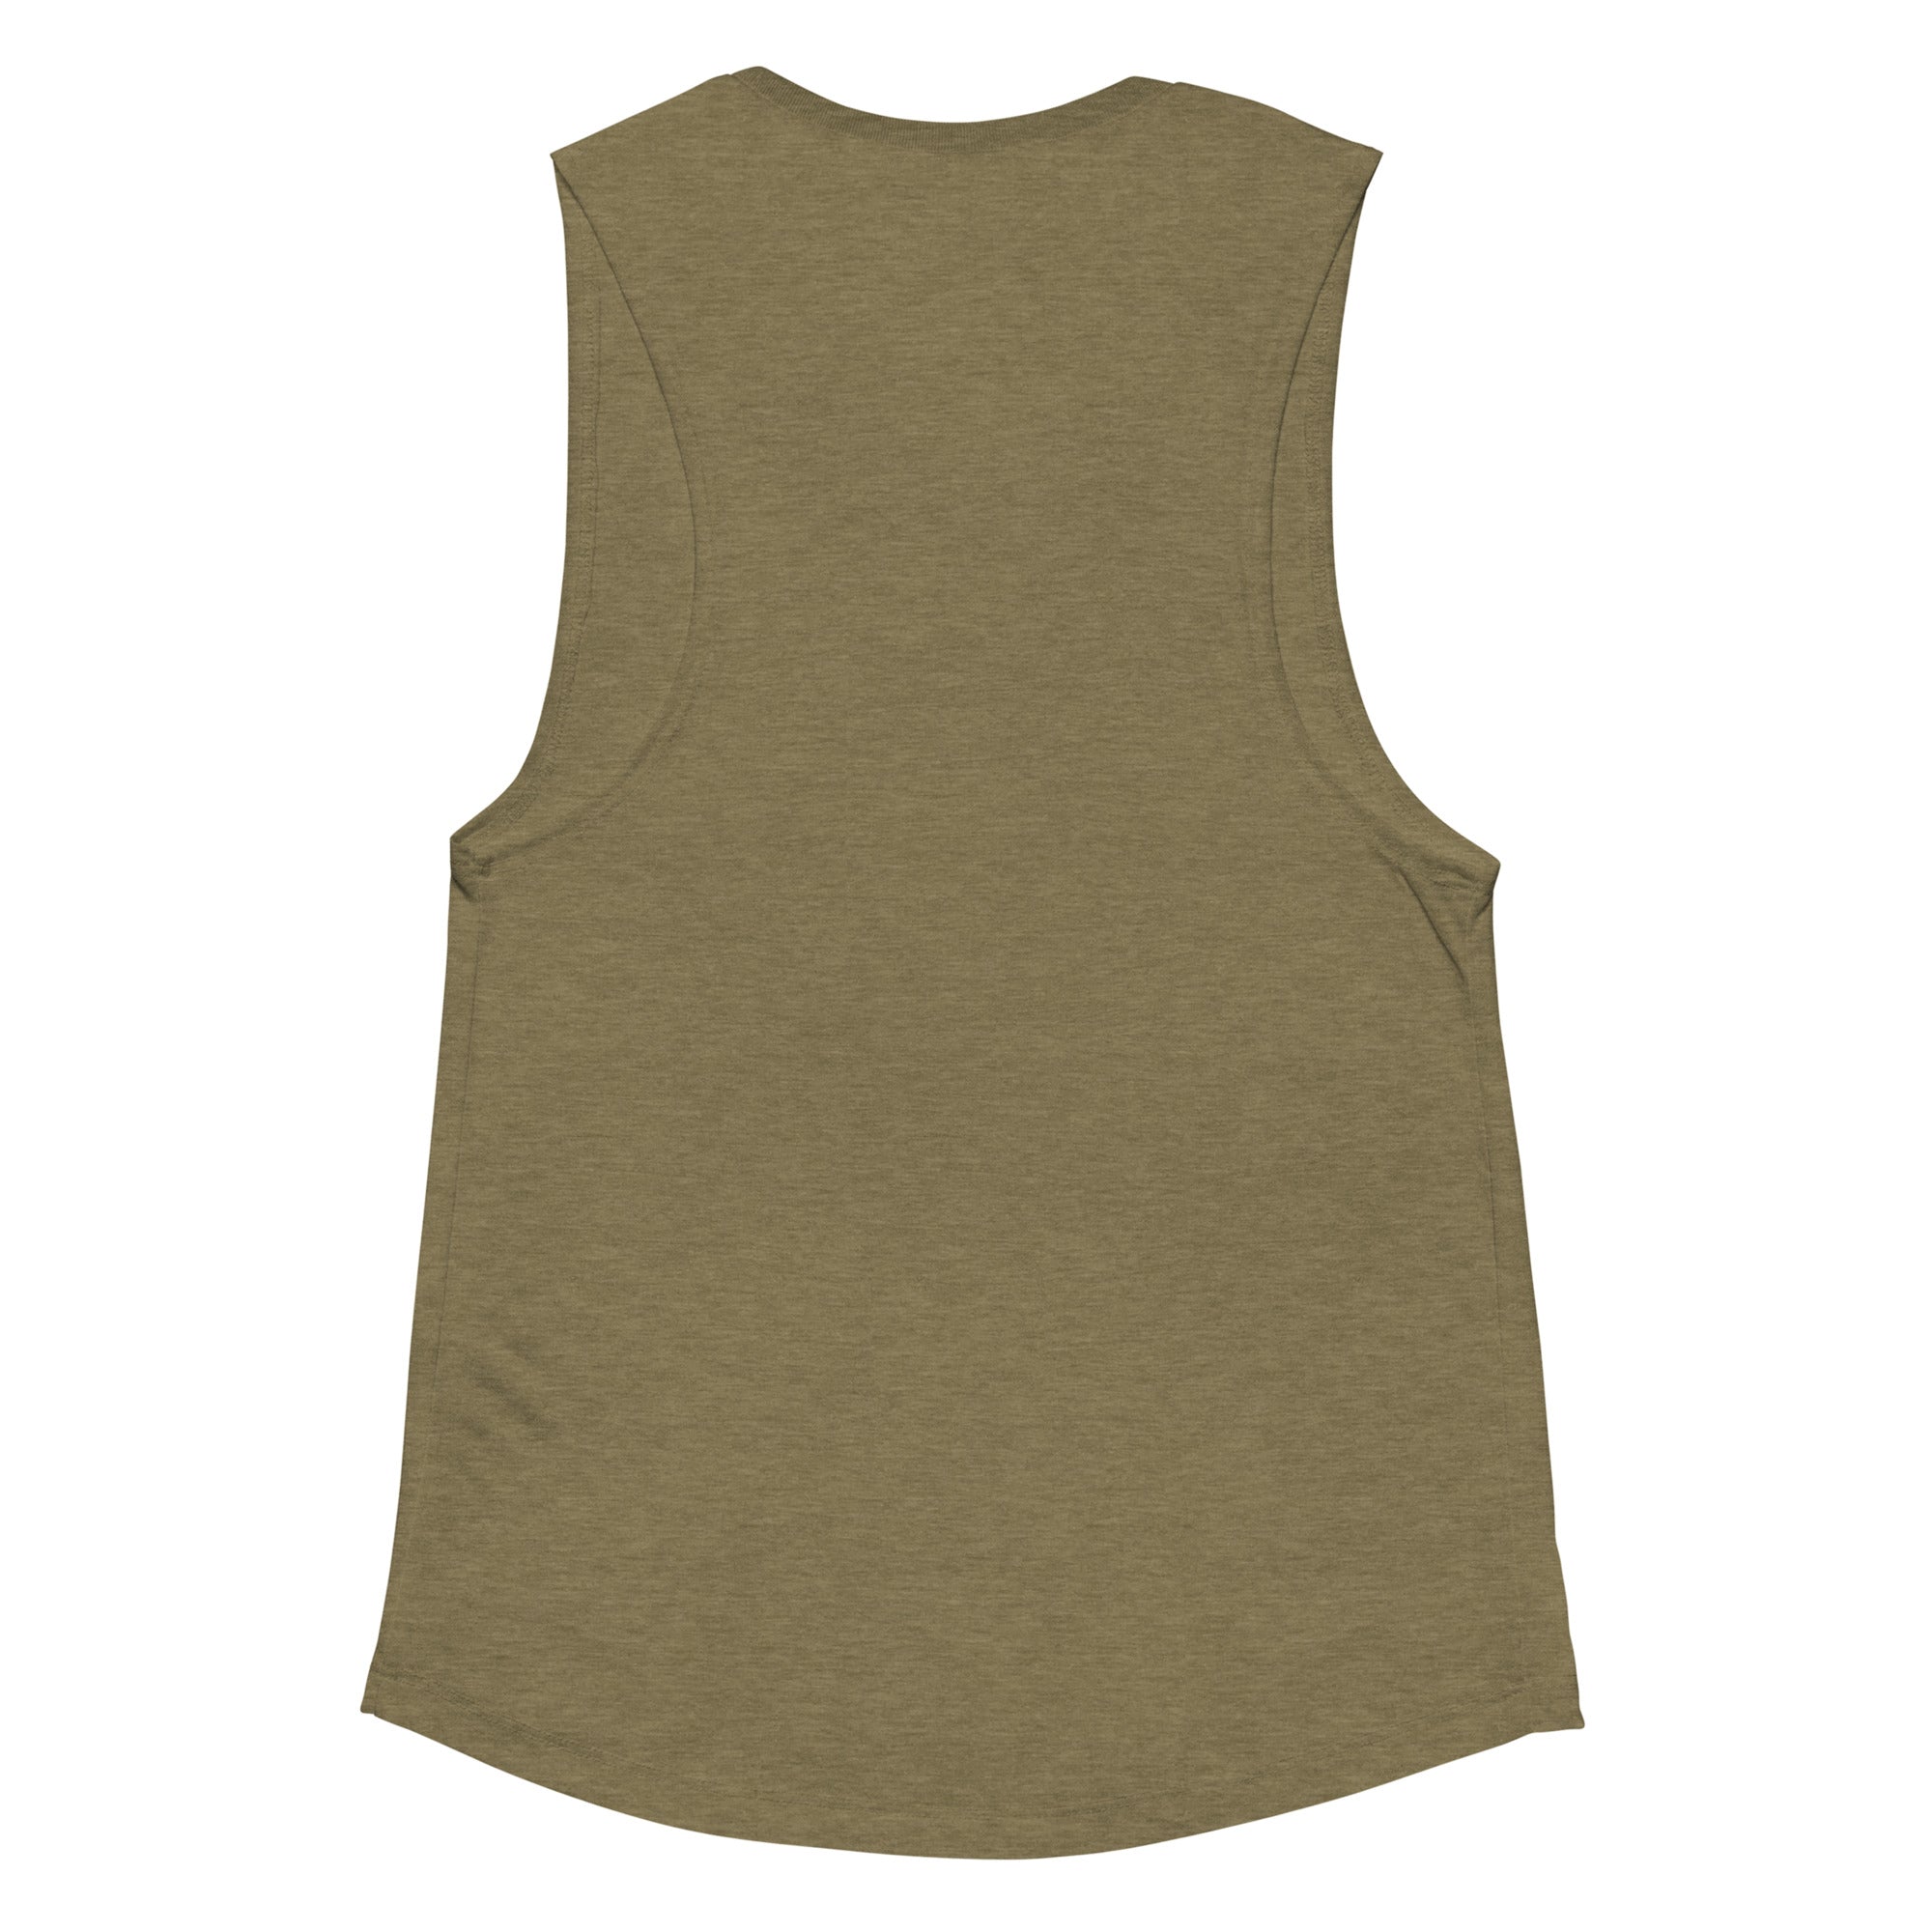 WOMEN'S MUSCLE TANK TOP – OLIVE HEATHER